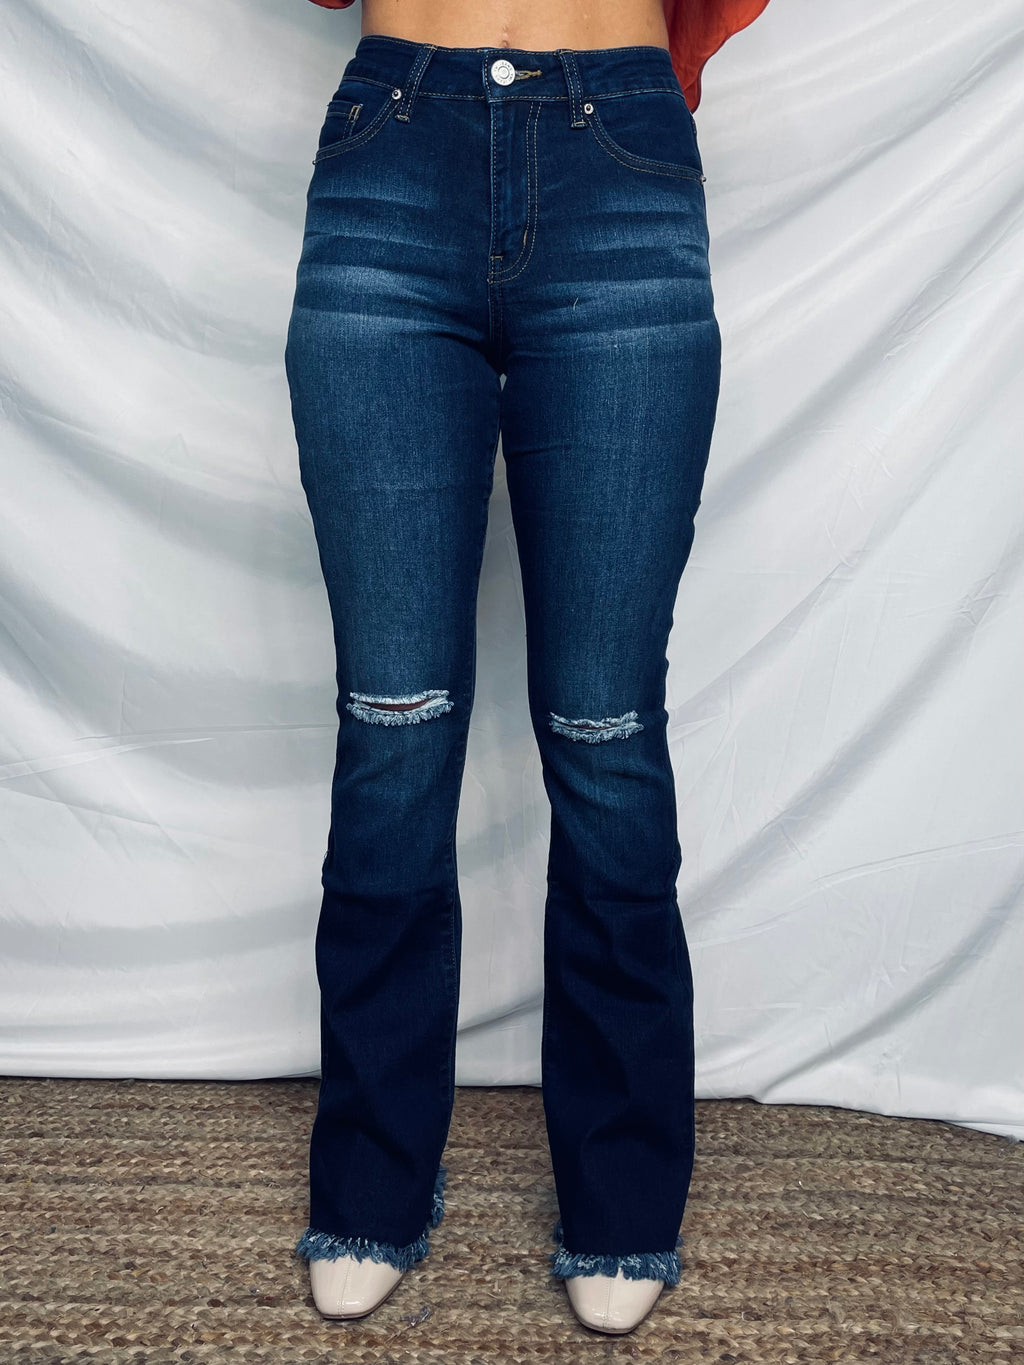 Jeans feature a dark wash, knee distressing, flared leg, frayed bottom, functional pockets, 32" inseam, high waisted and runs true to size!   Measurement (Based on size 5) - Inseam: 32" - Rise (To top edge of band): 10" - Leg Opening: 21"  Composition For Color S933: - 73% Cotton/ 25% Polyester/ 2% Spandex